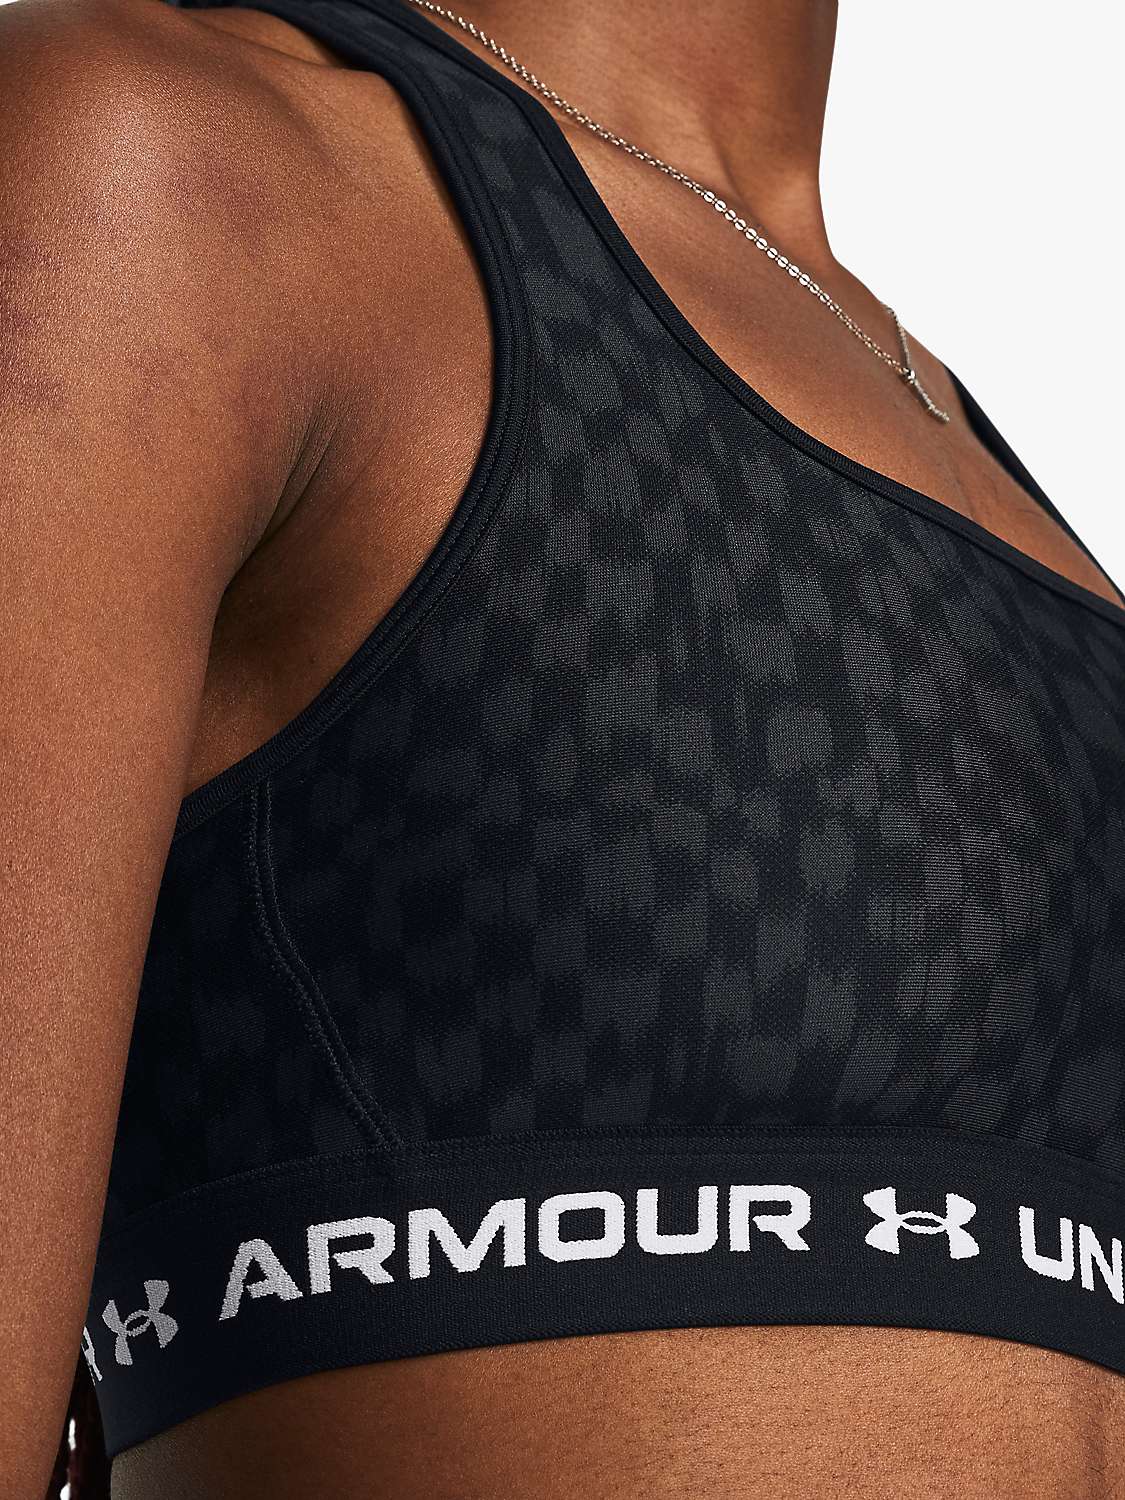 Buy Under Armour Mid Cross Back Printed Sports Bra, Black/White Online at johnlewis.com